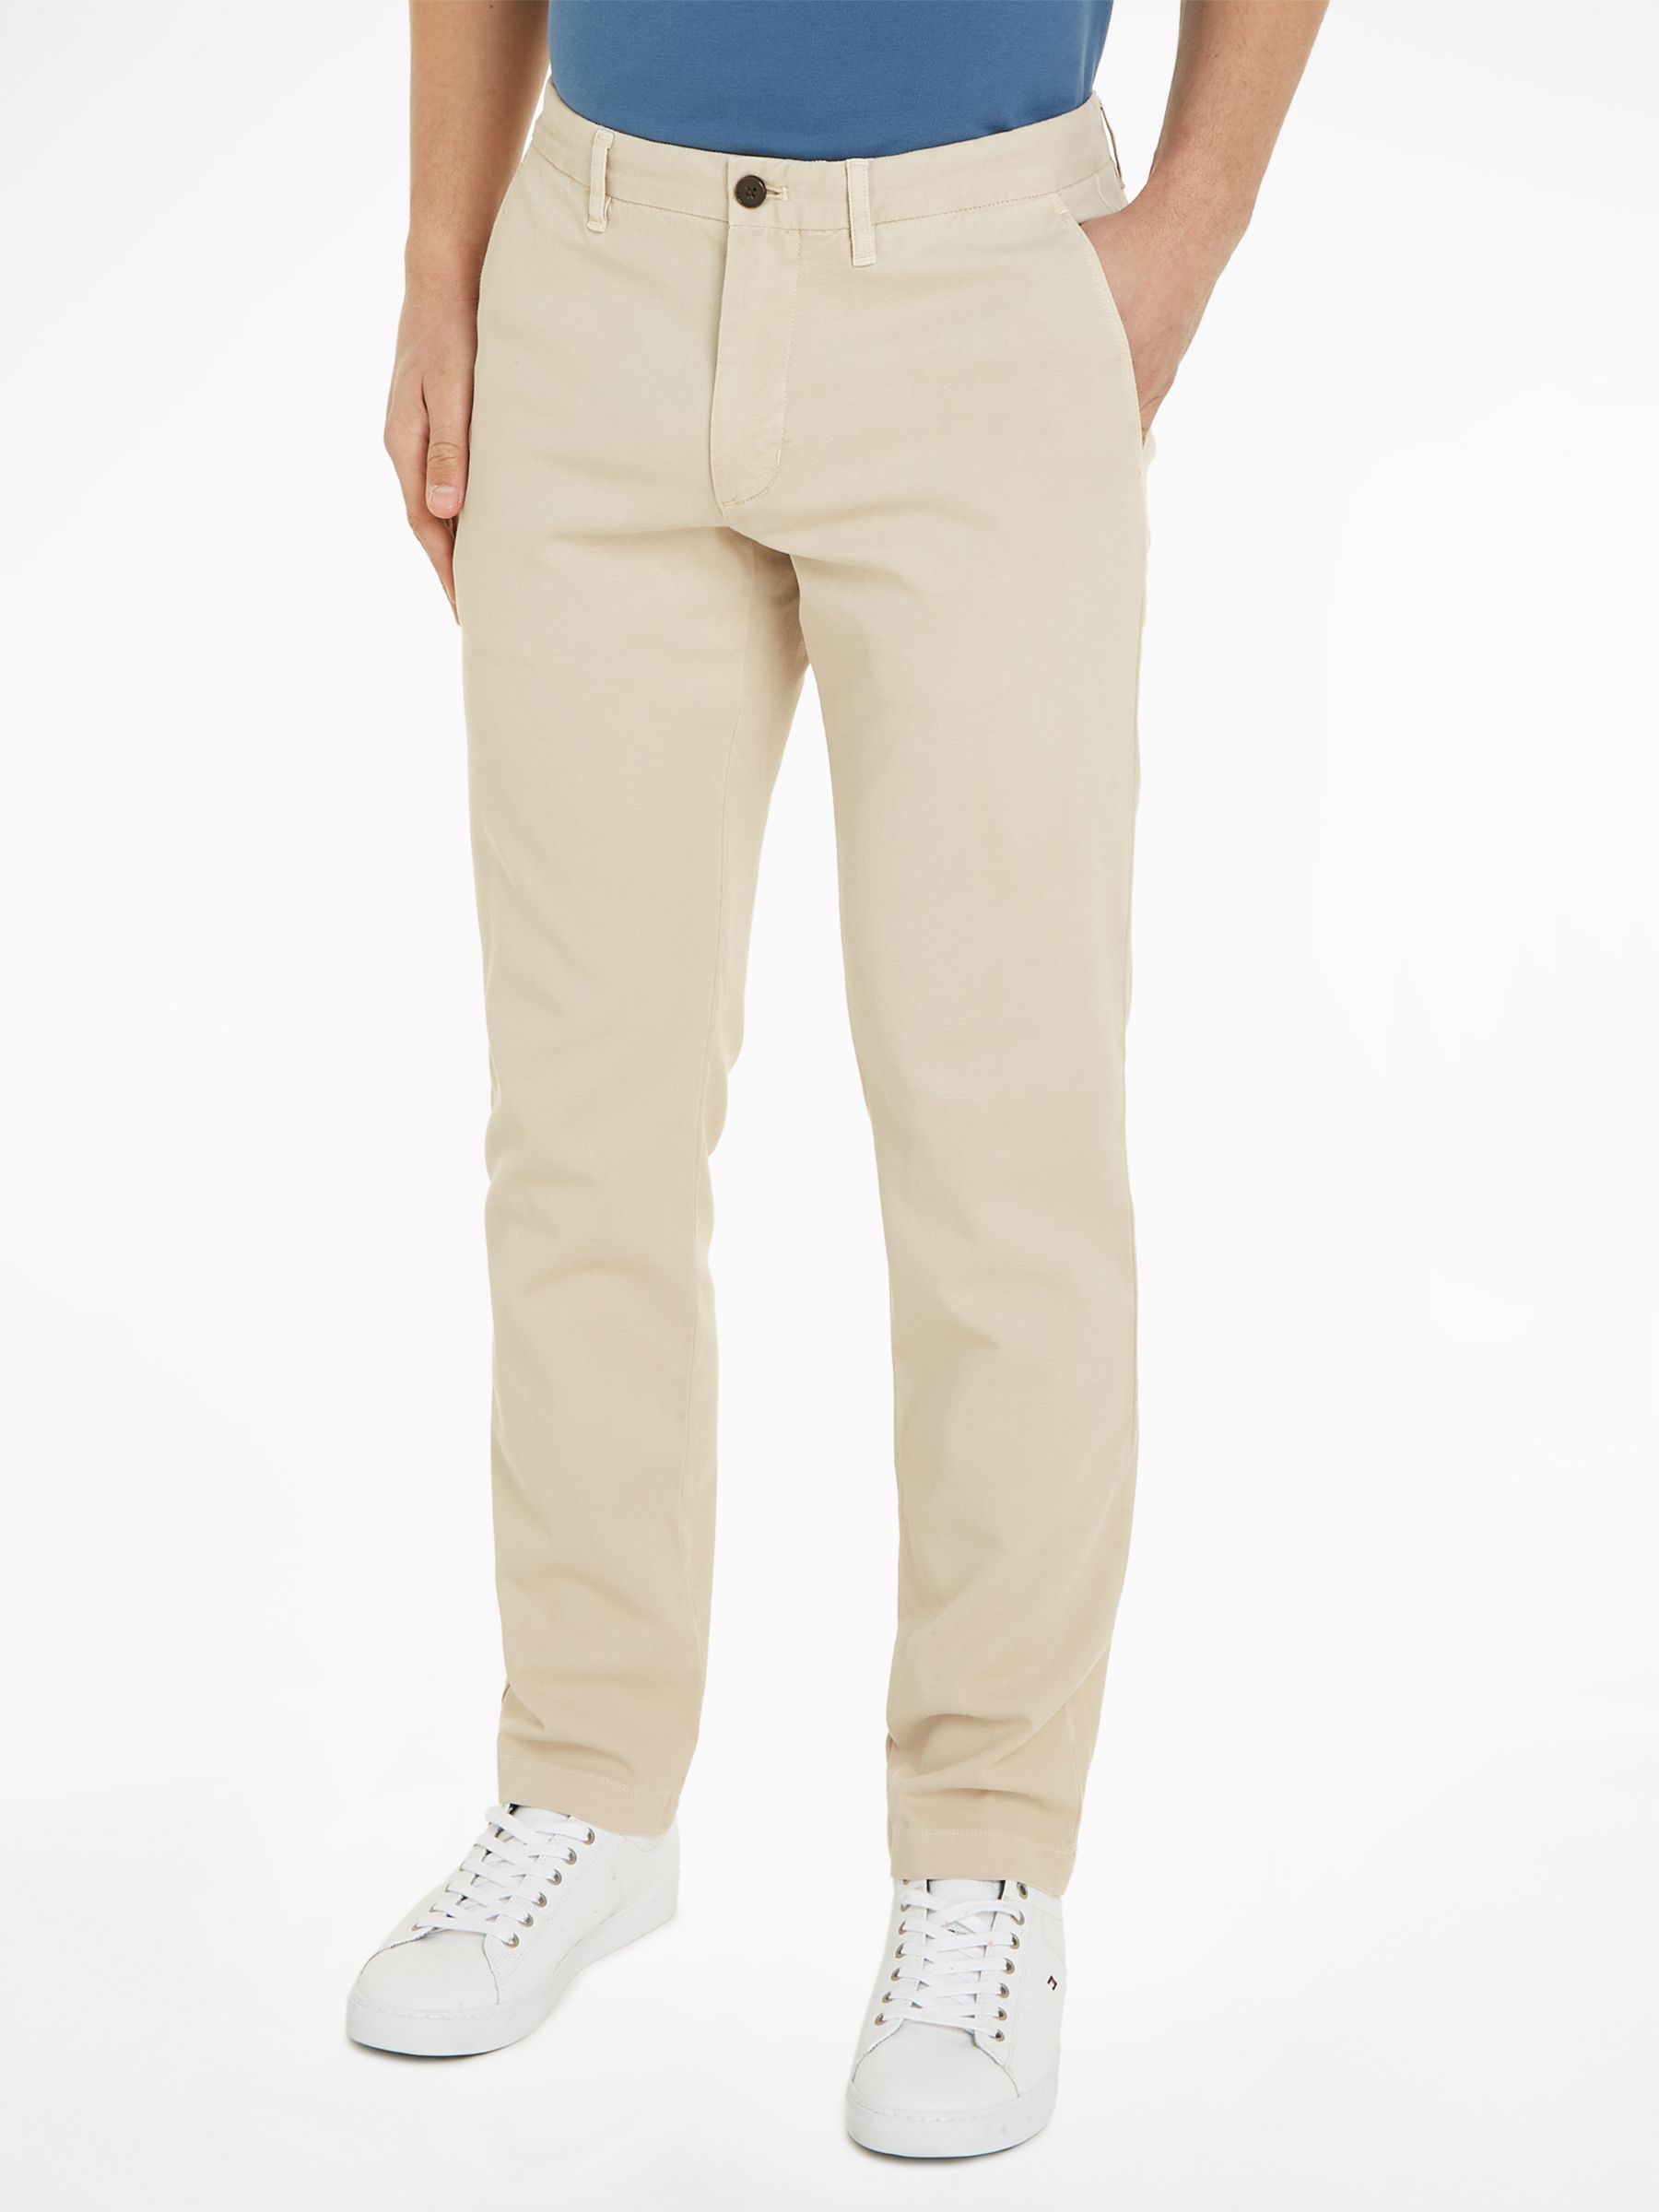 Tommy Hilfiger Denton Cotton Chinos, Bleached Stone at John Lewis ...